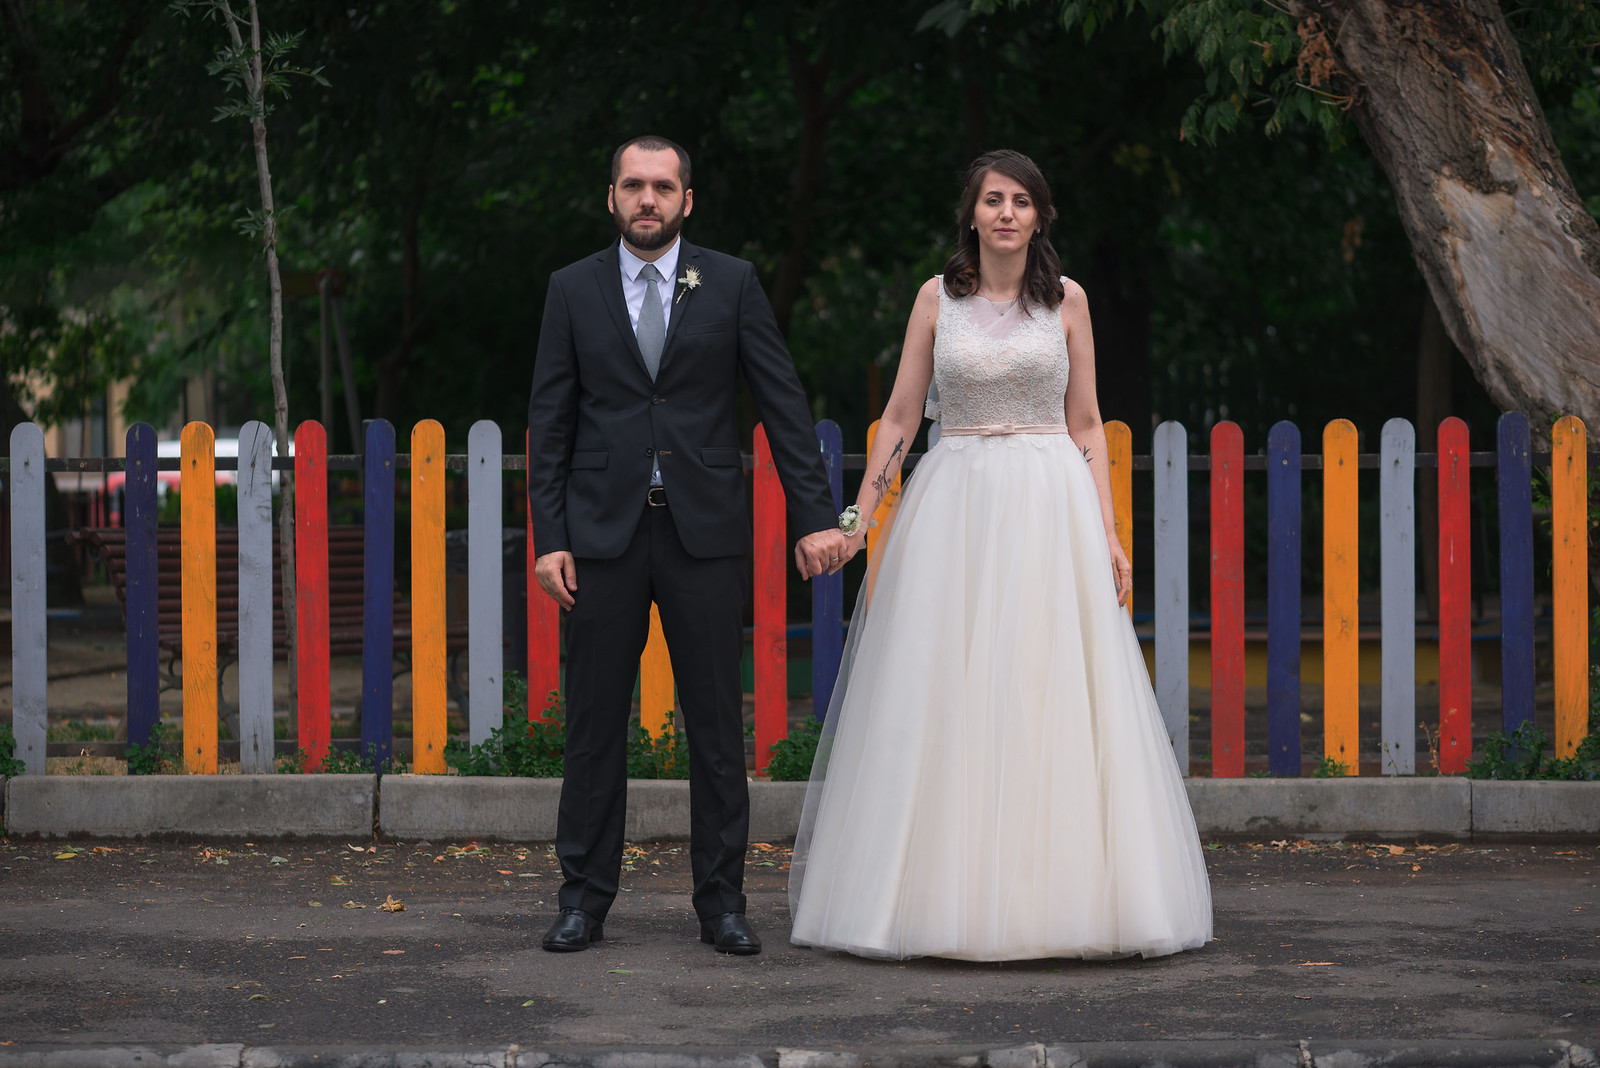 fine, art, wedding, photography, fine art photography, before wedding, after wedding, session, candid, emotional, artistic, documentary, pictures, romania, bucharest, bucuresti, epspictures, endless, purple, skies, pictures, photo session, fotografie, nunta, foto nunta, trash the dress, love the dress